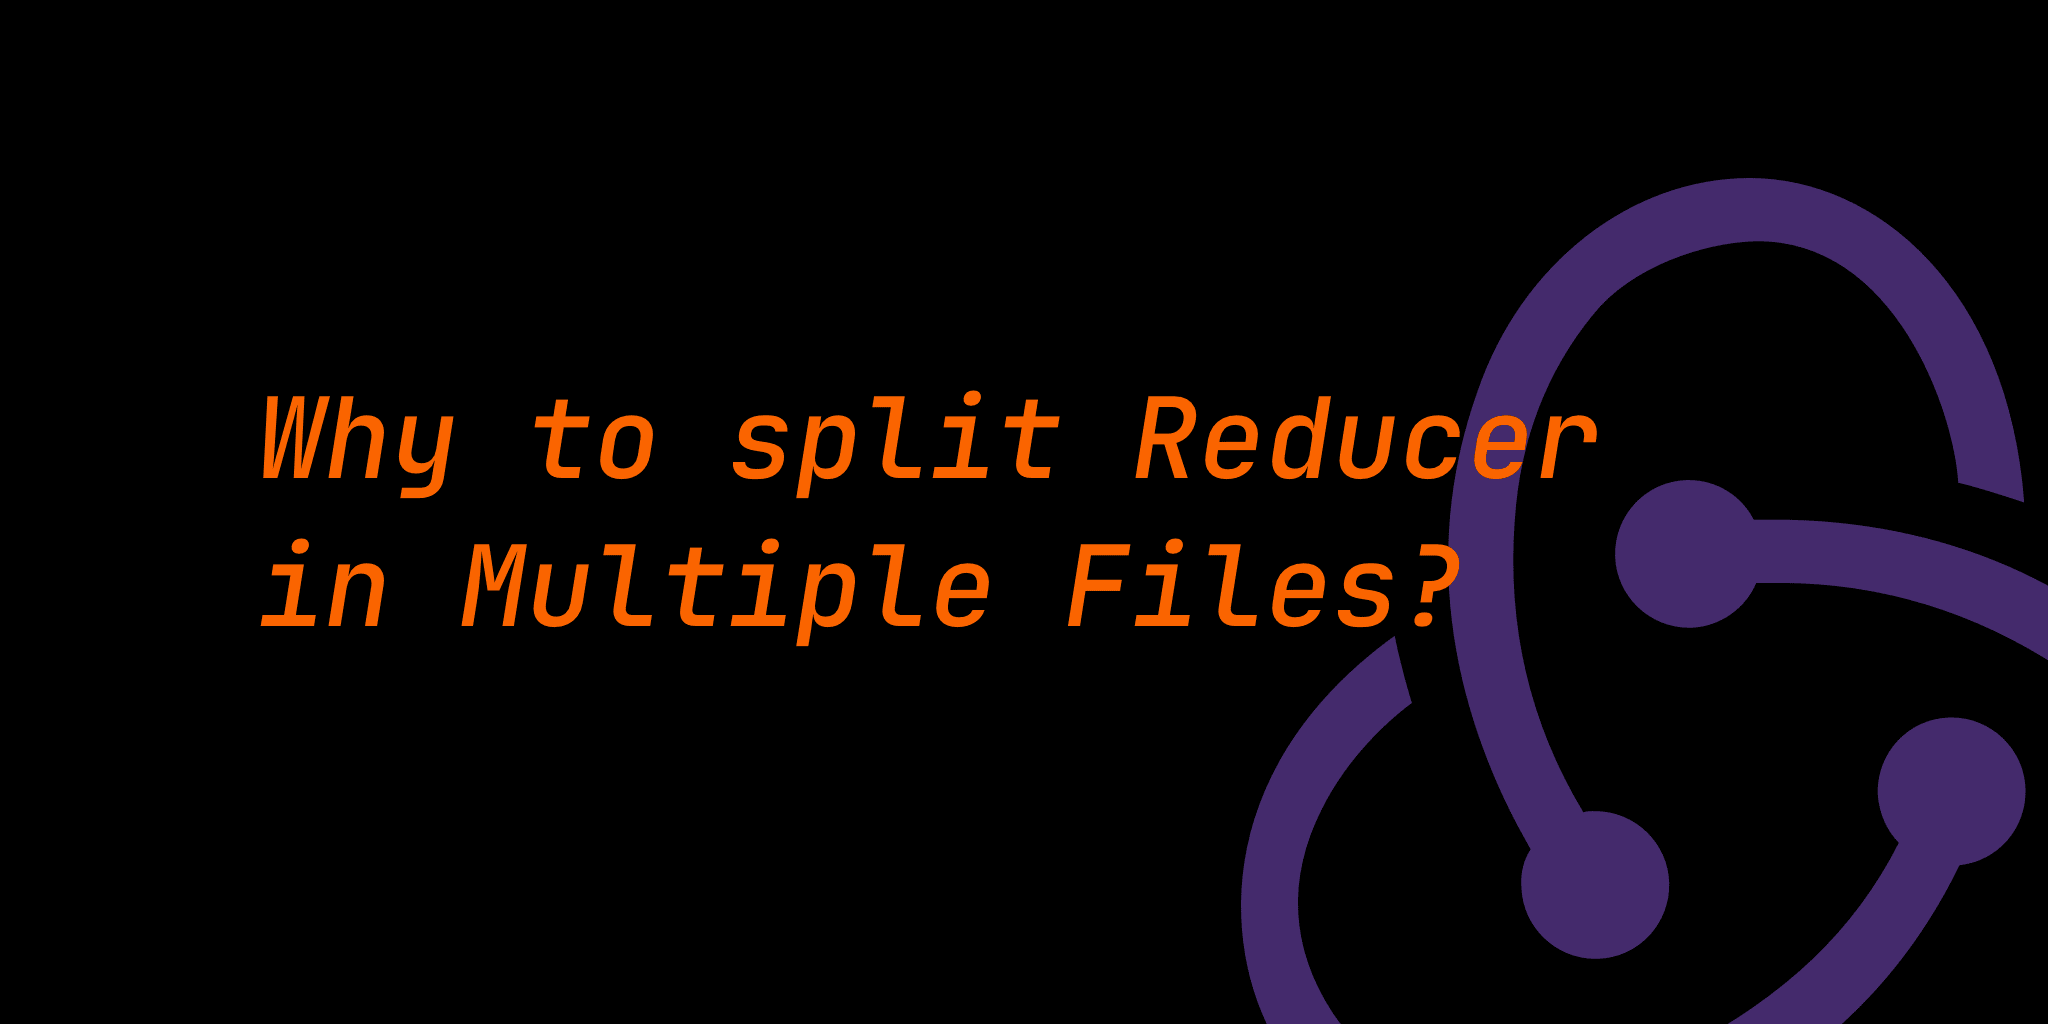 Why it is Better to spread the Reducer in Files